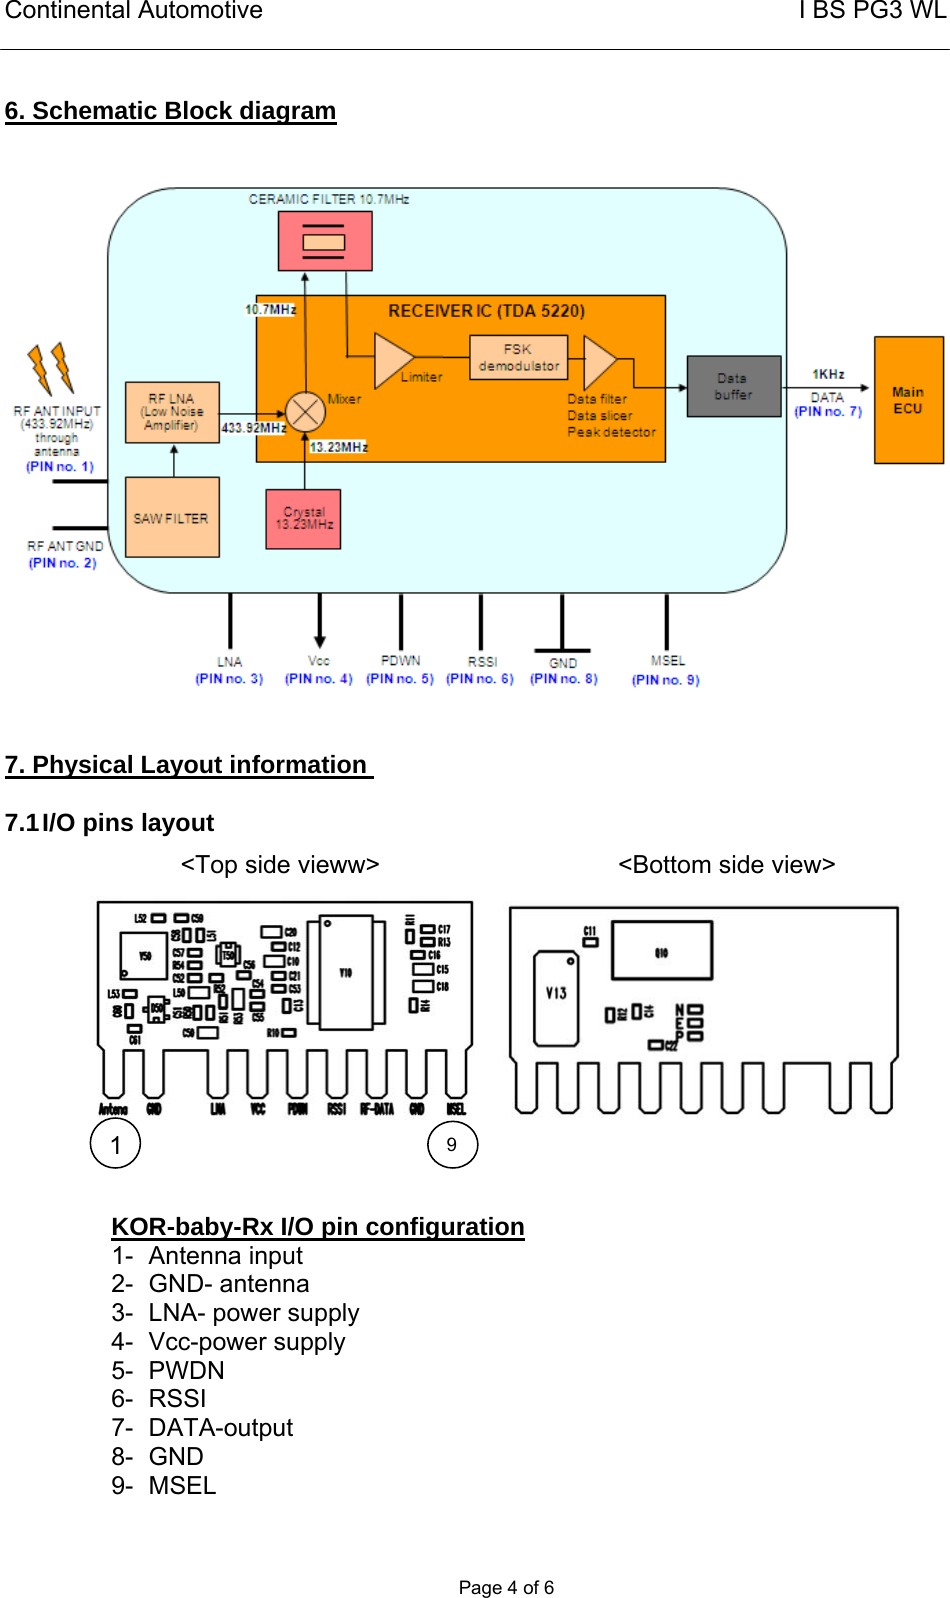 Continental Automotive                                                       I BS PG3 WL       Page 4 of 6  6. Schematic Block diagram      7. Physical Layout information   7.1 I/O pins layout              KOR-baby-Rx I/O pin configuration 1- Antenna input 2- GND- antenna 3-  LNA- power supply  4- Vcc-power supply 5- PWDN 6- RSSI 7- DATA-output 8- GND 9- MSEL 1  9&lt;Top side vieww&gt;  &lt;Bottom side view&gt; 